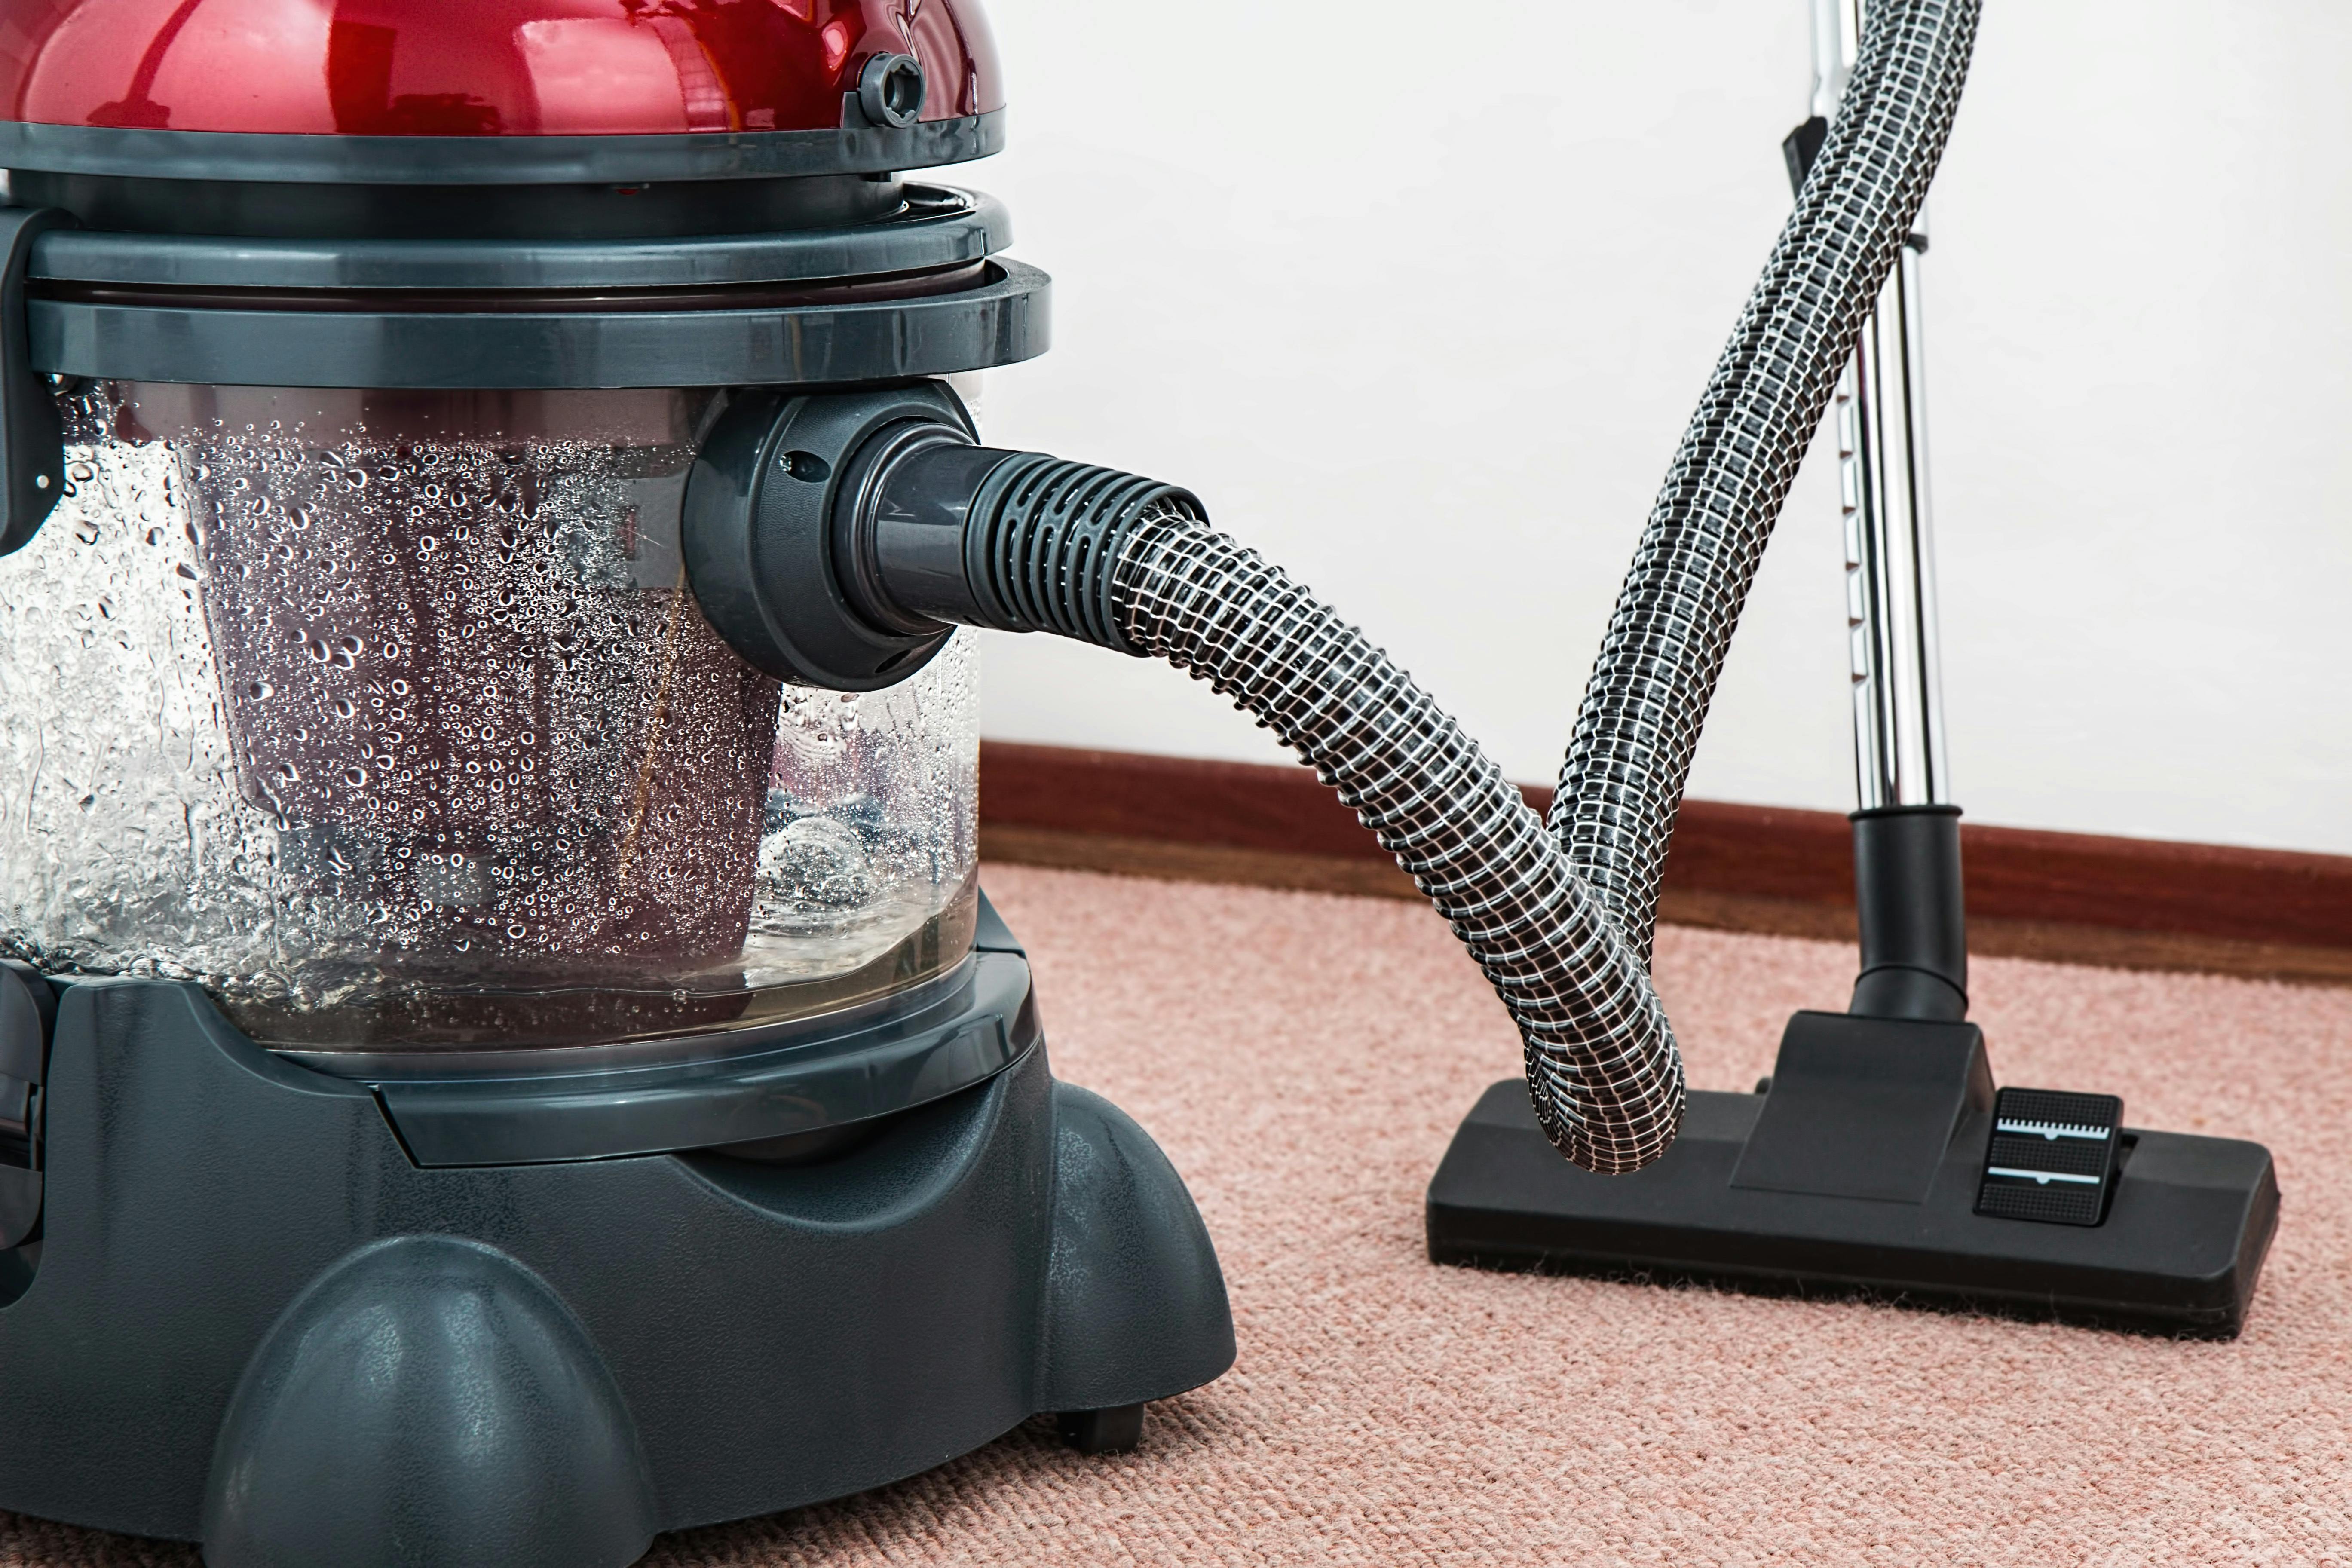 Black and Red Canister Vacuum Cleaner on Floor \u00b7 Free Stock Photo